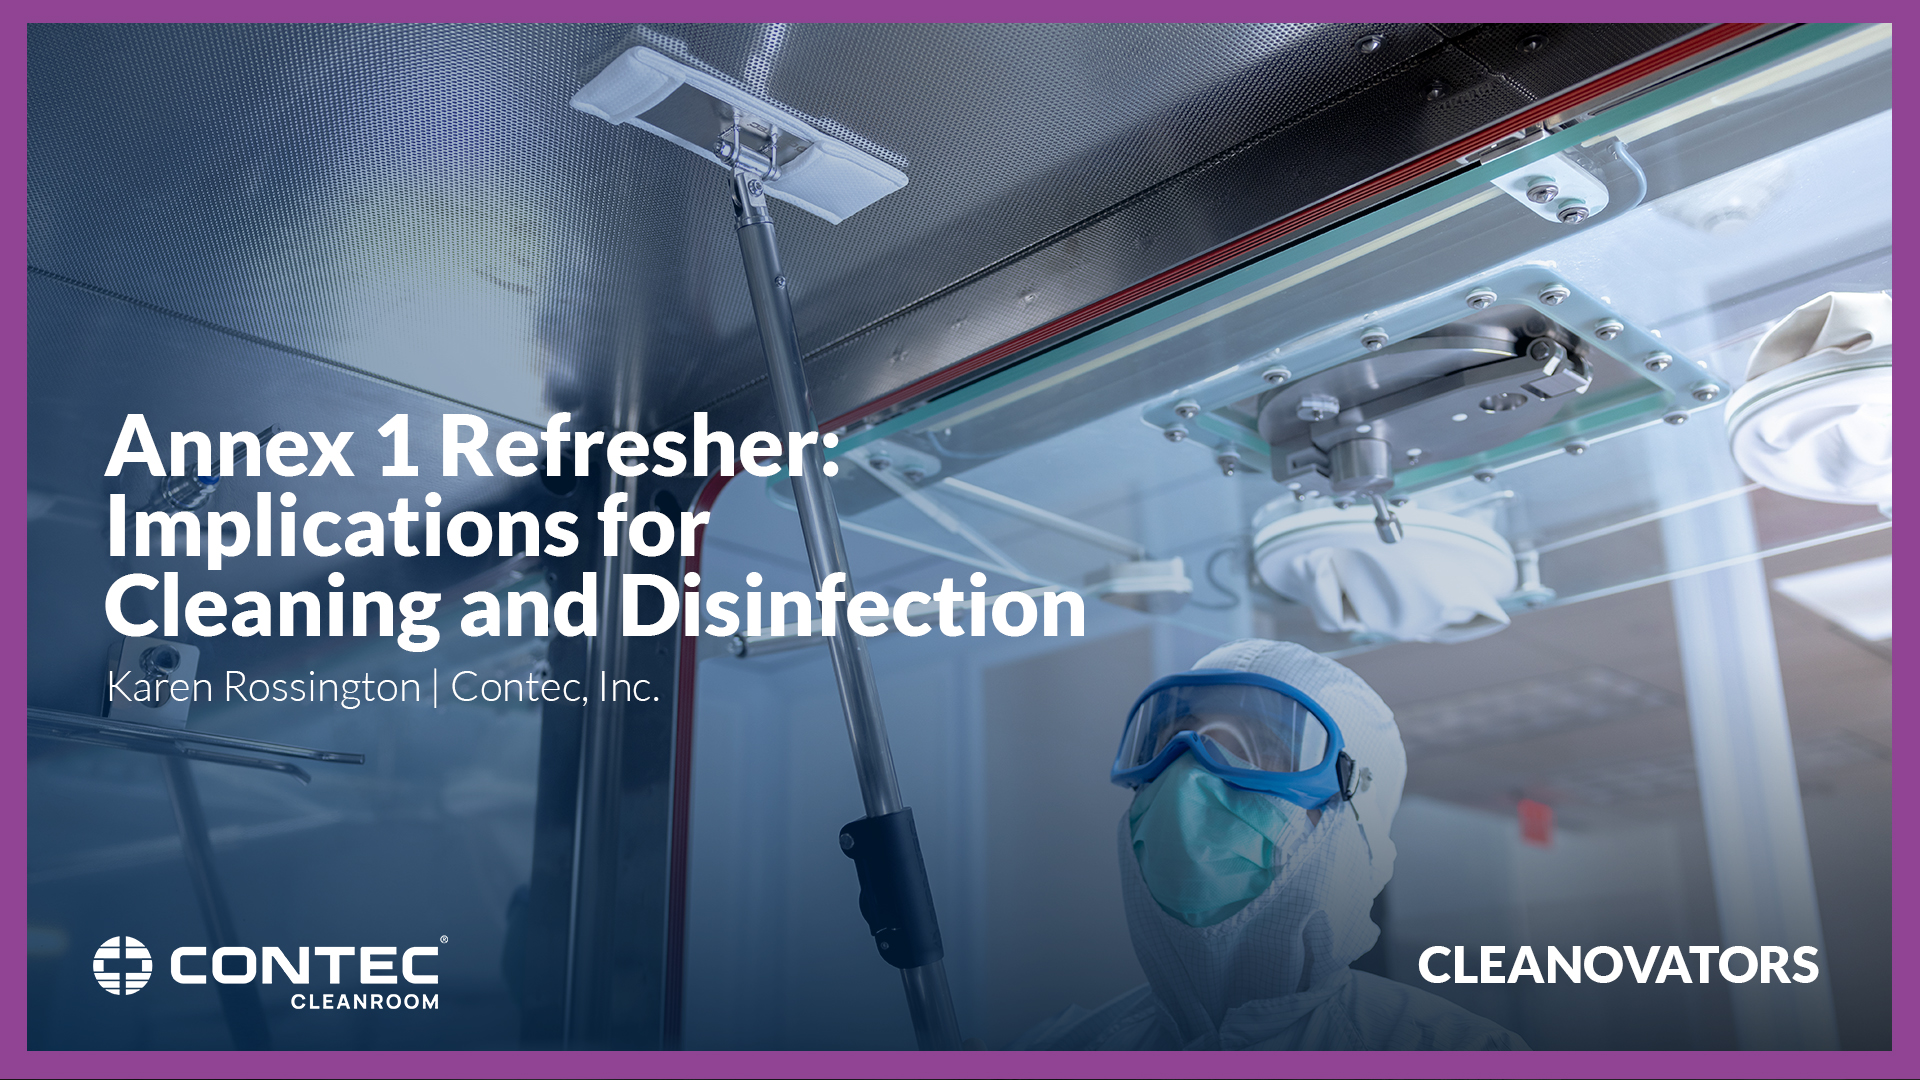 Image of CLEANOVATORS 2023 - Annex 1 Refresher: Implications for Cleaning and Disinfection